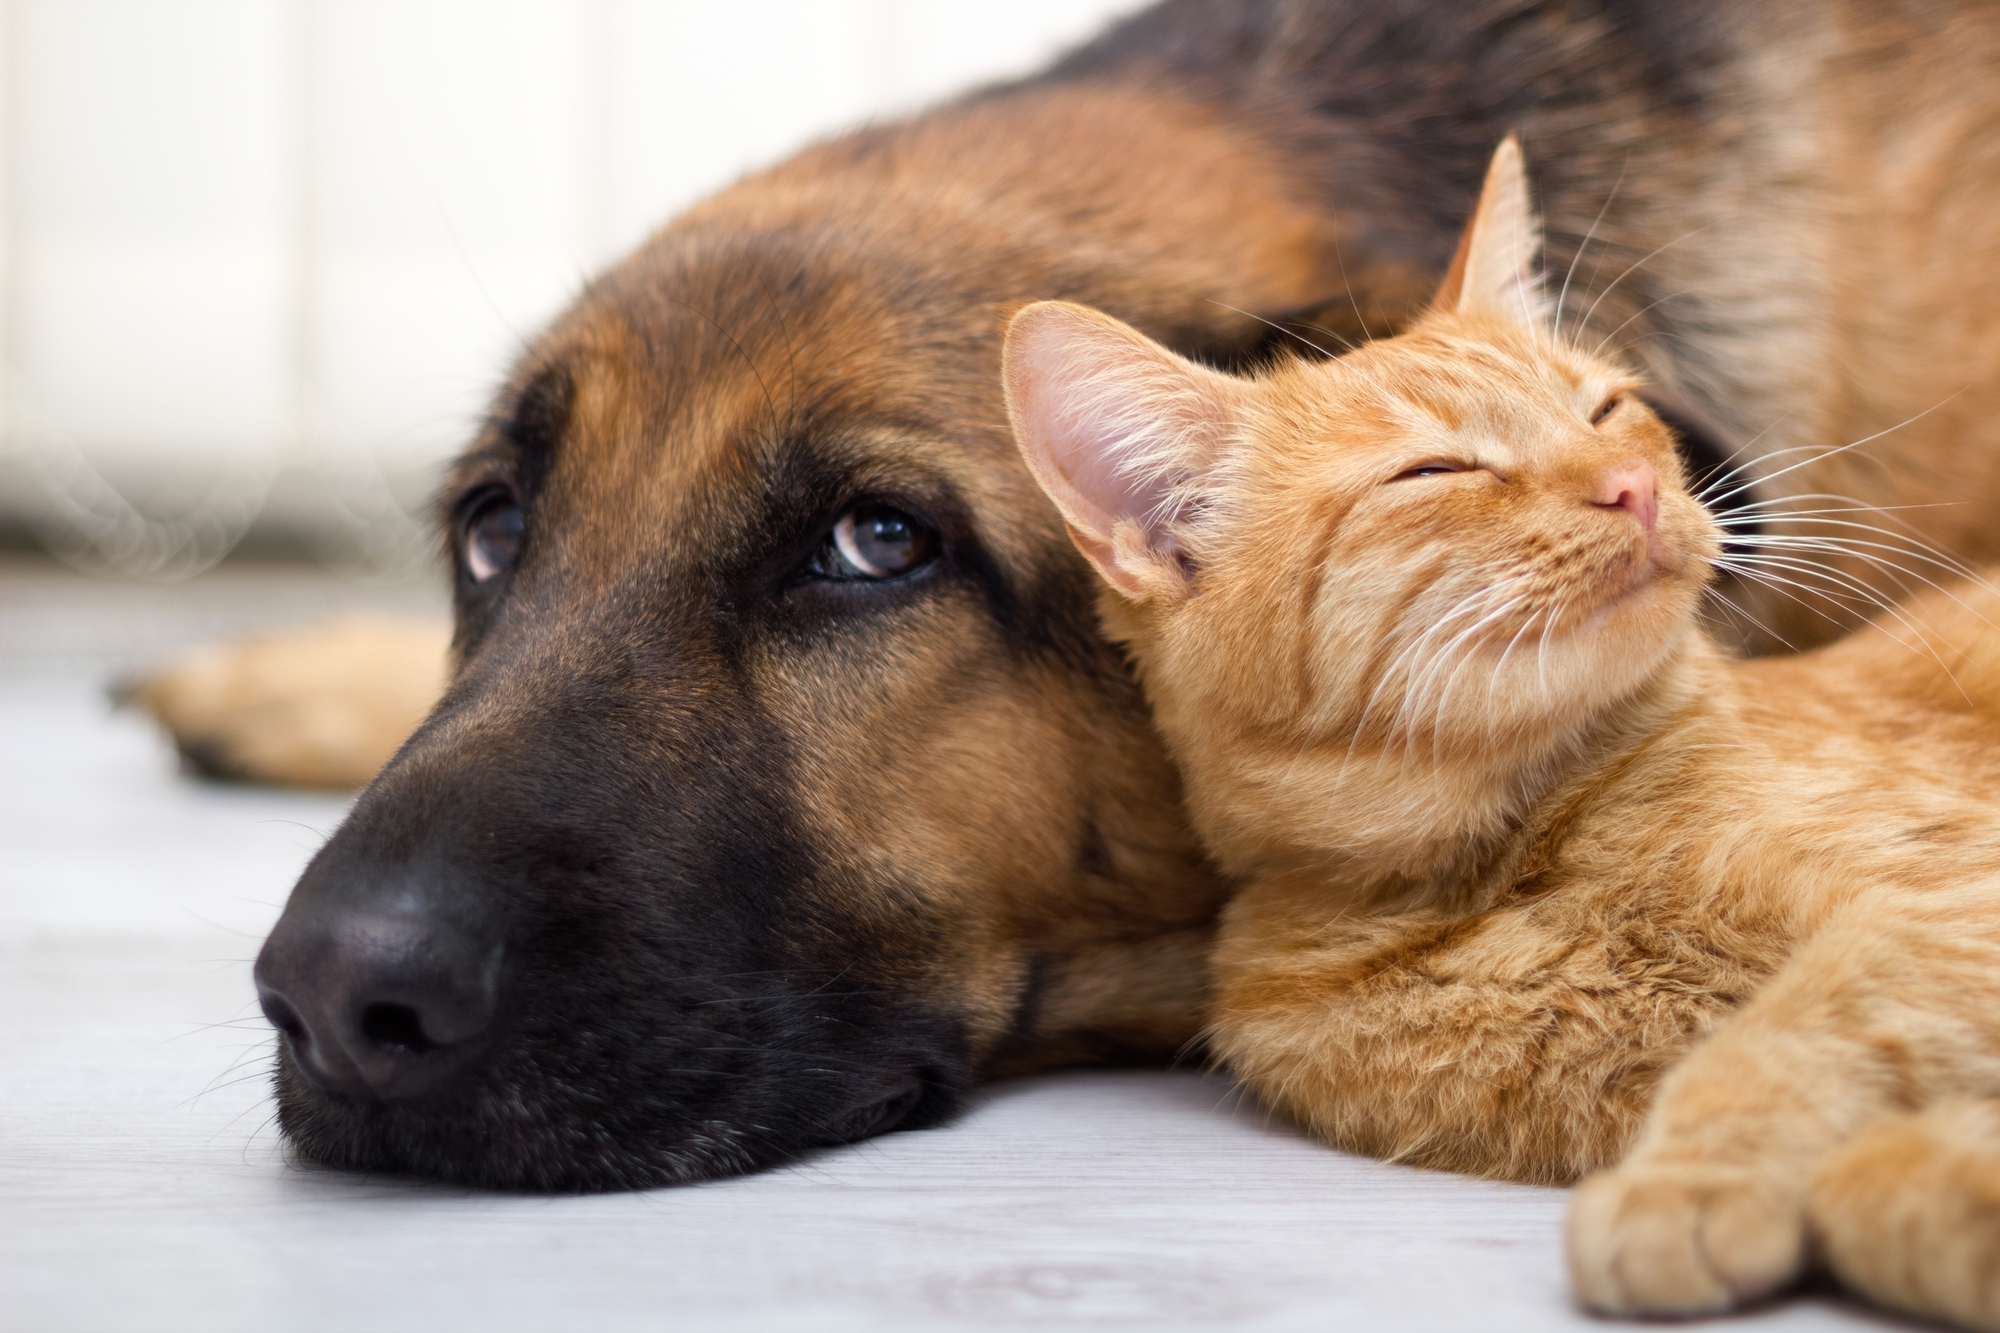 How To Healthily Cope With The Death Of A Pet